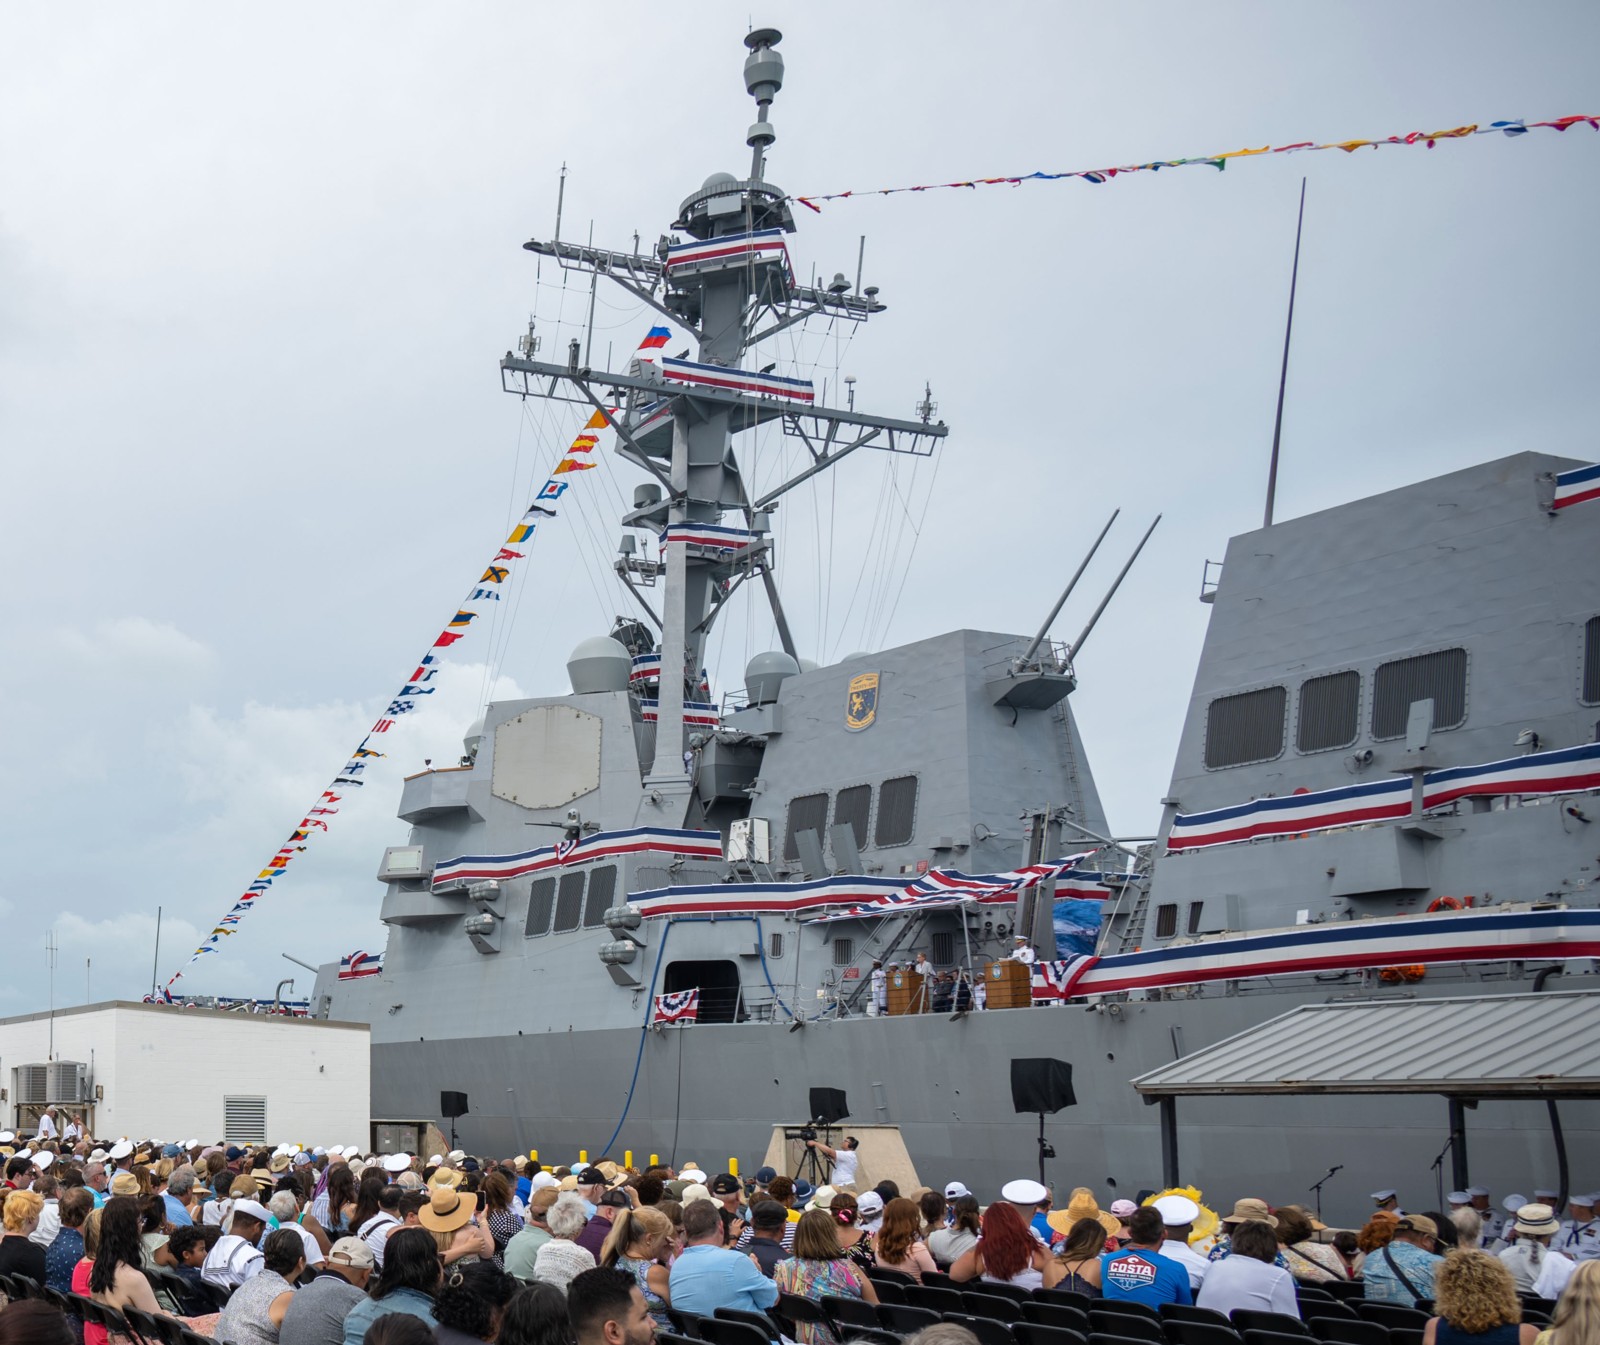 ddg-123 uss lenah h. sutcliffe higbee arleigh burke class guided missile destroyer aegis us navy commissioning key west florida 23